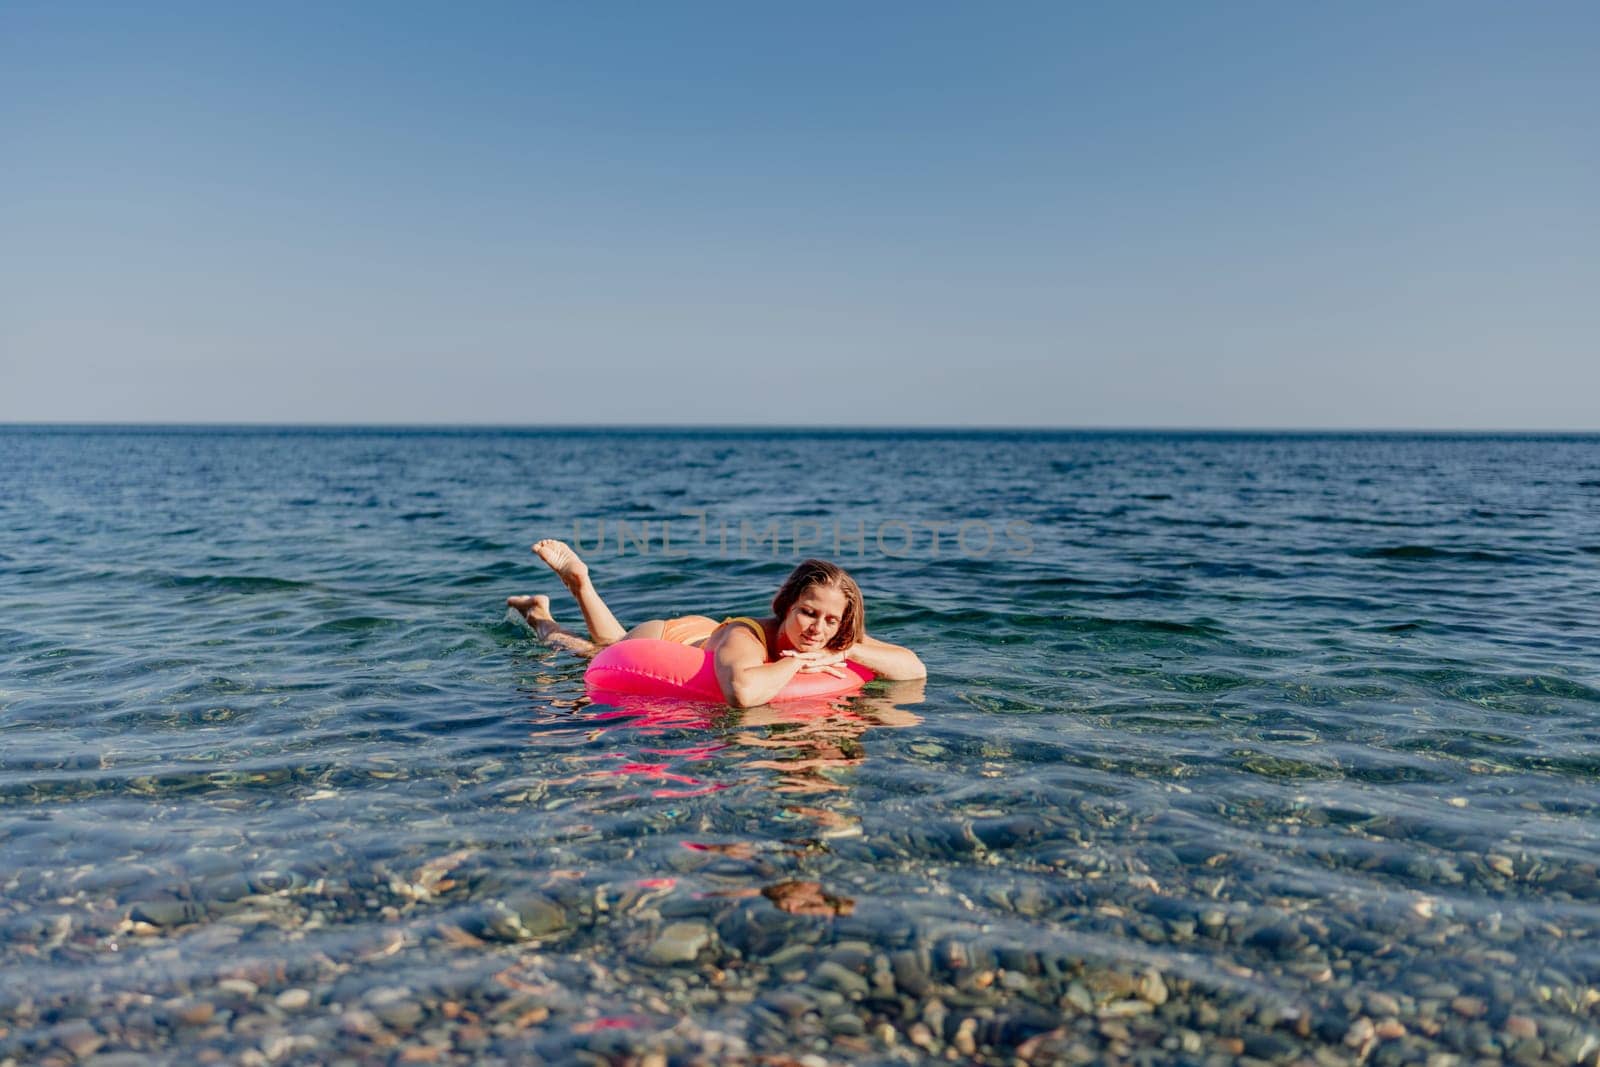 A woman is floating on a pink inflatable raft in the ocean. The water is calm and the sky is clear. The woman is enjoying her time in the water